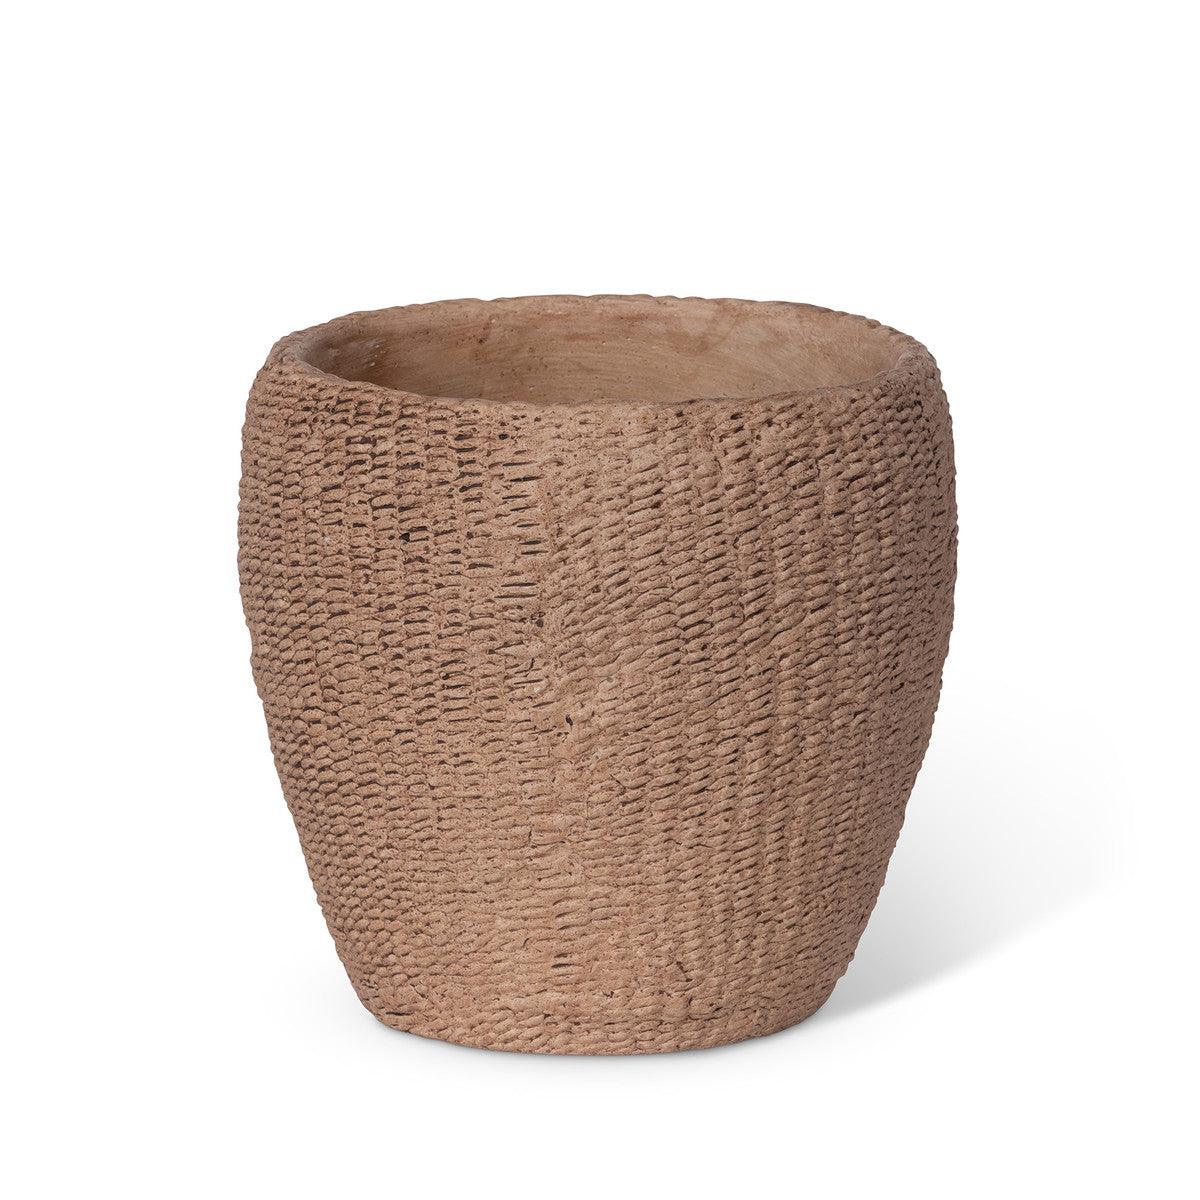 Seagrass Relief Pattern Cement Pot, 8" - Signastyle Boutique